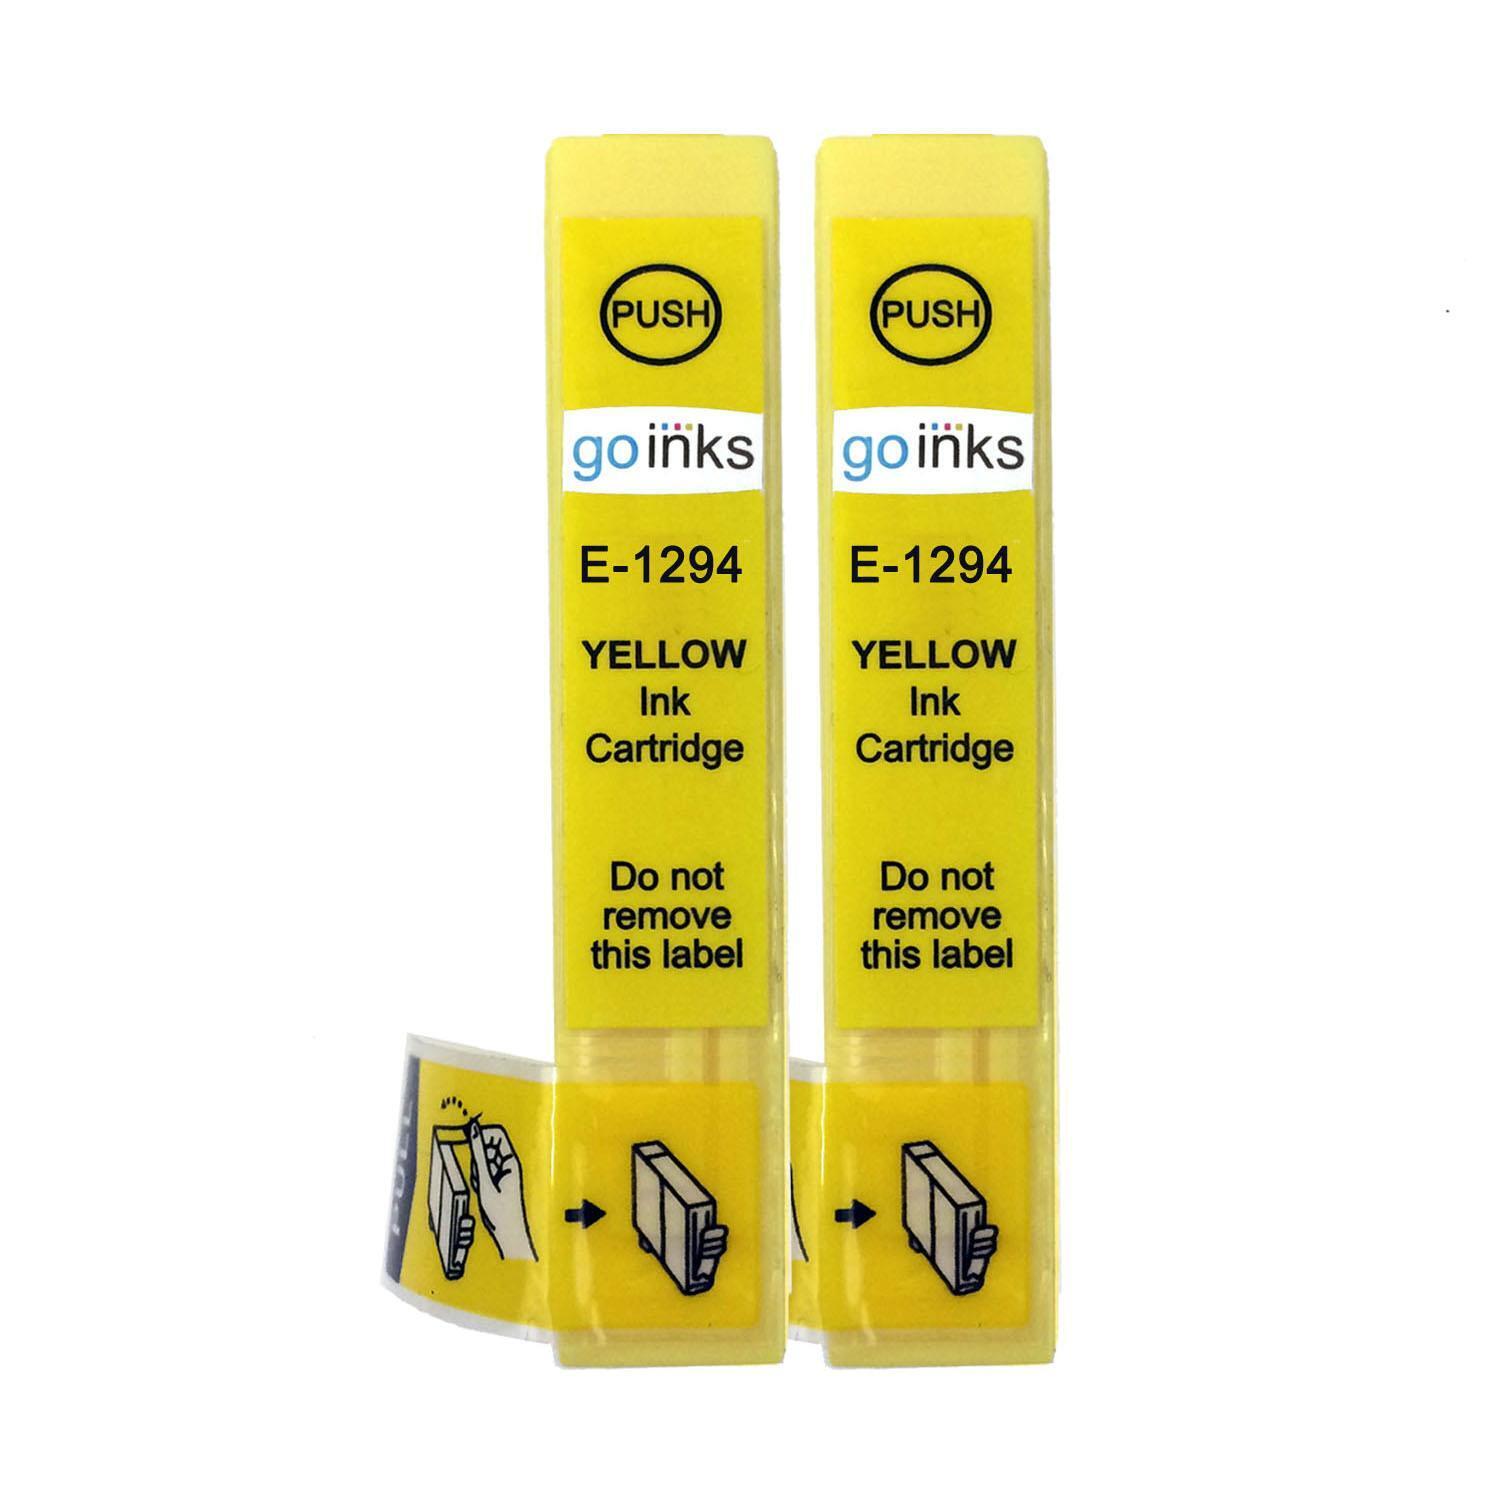 2 Yellow Ink Cartridges non-OEM to replace T1294 (Apple) Compatible for Printers